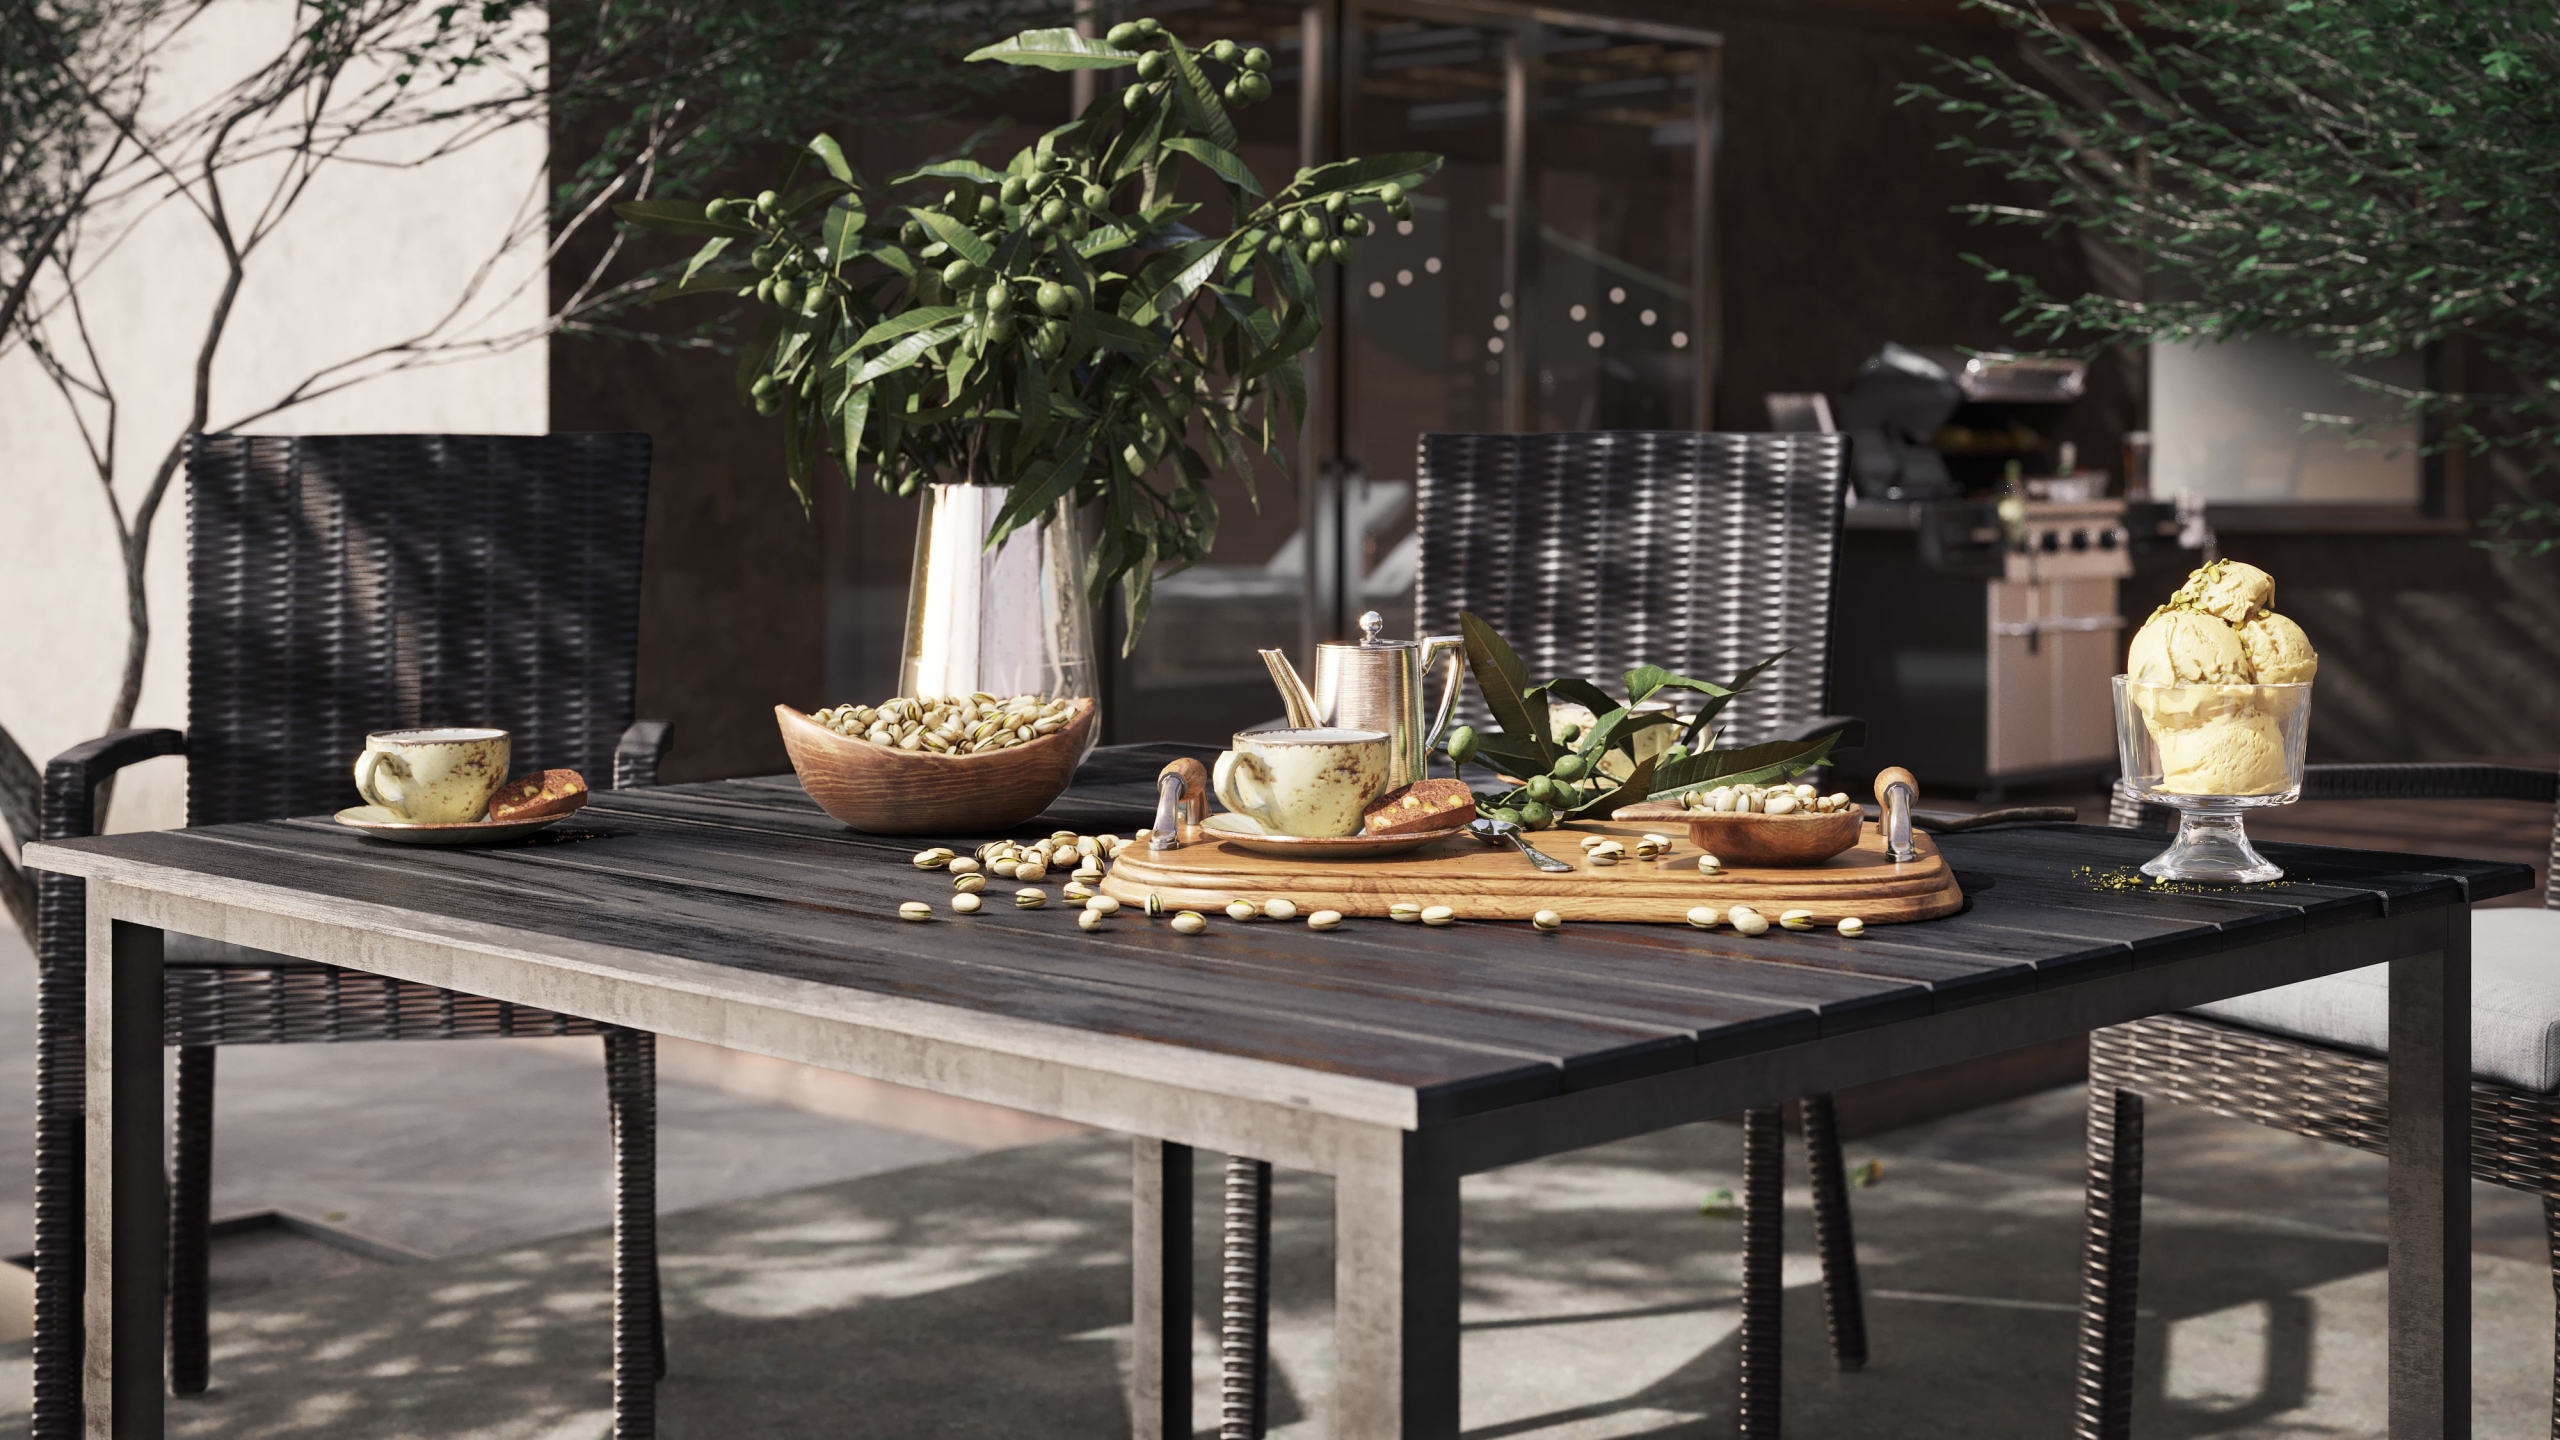 Outddor Table Lifestyle Rendering